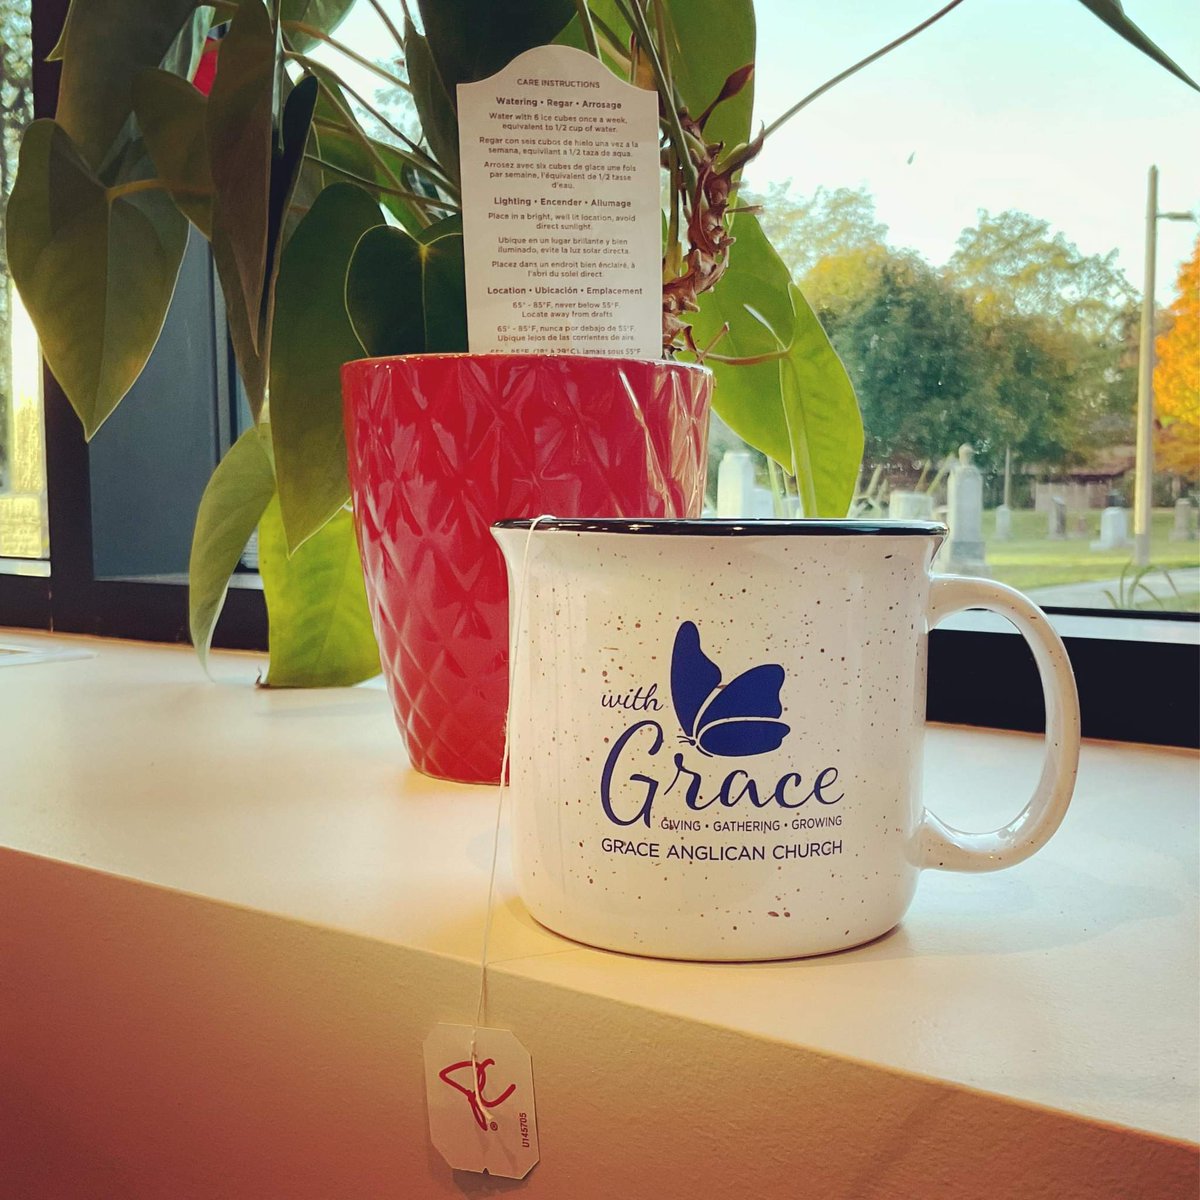 Come on in for a cup of joy! ☕️ The Grace Inclusive Cafe is open today until 11:30 am. 

#GraceAnglicanWaterdown #InclusiveCafe